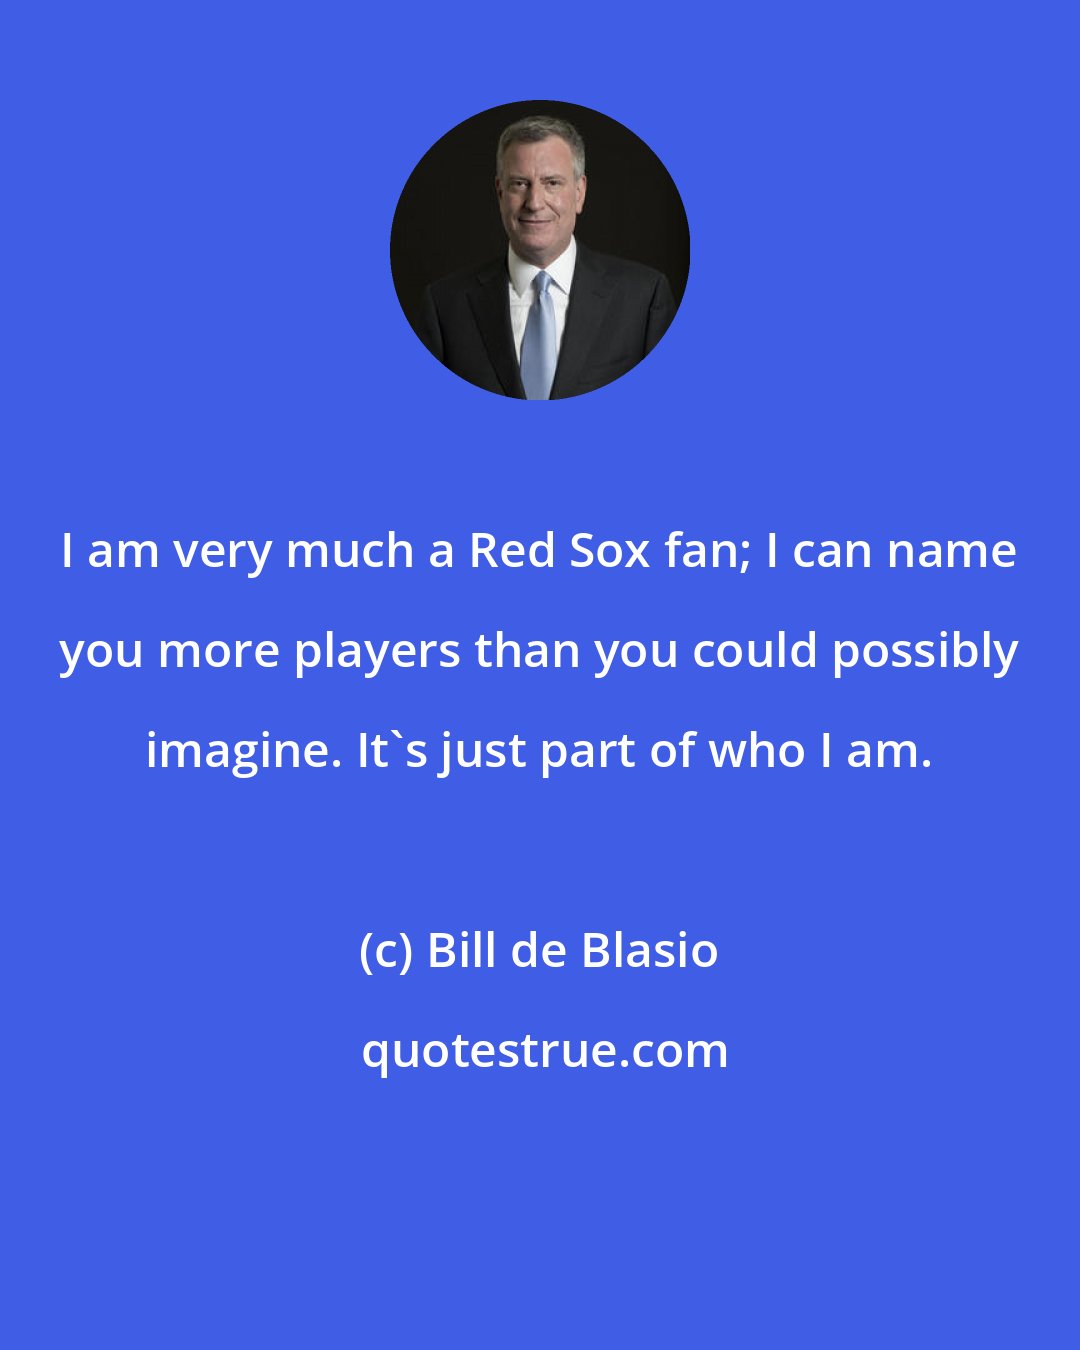 Bill de Blasio: I am very much a Red Sox fan; I can name you more players than you could possibly imagine. It's just part of who I am.